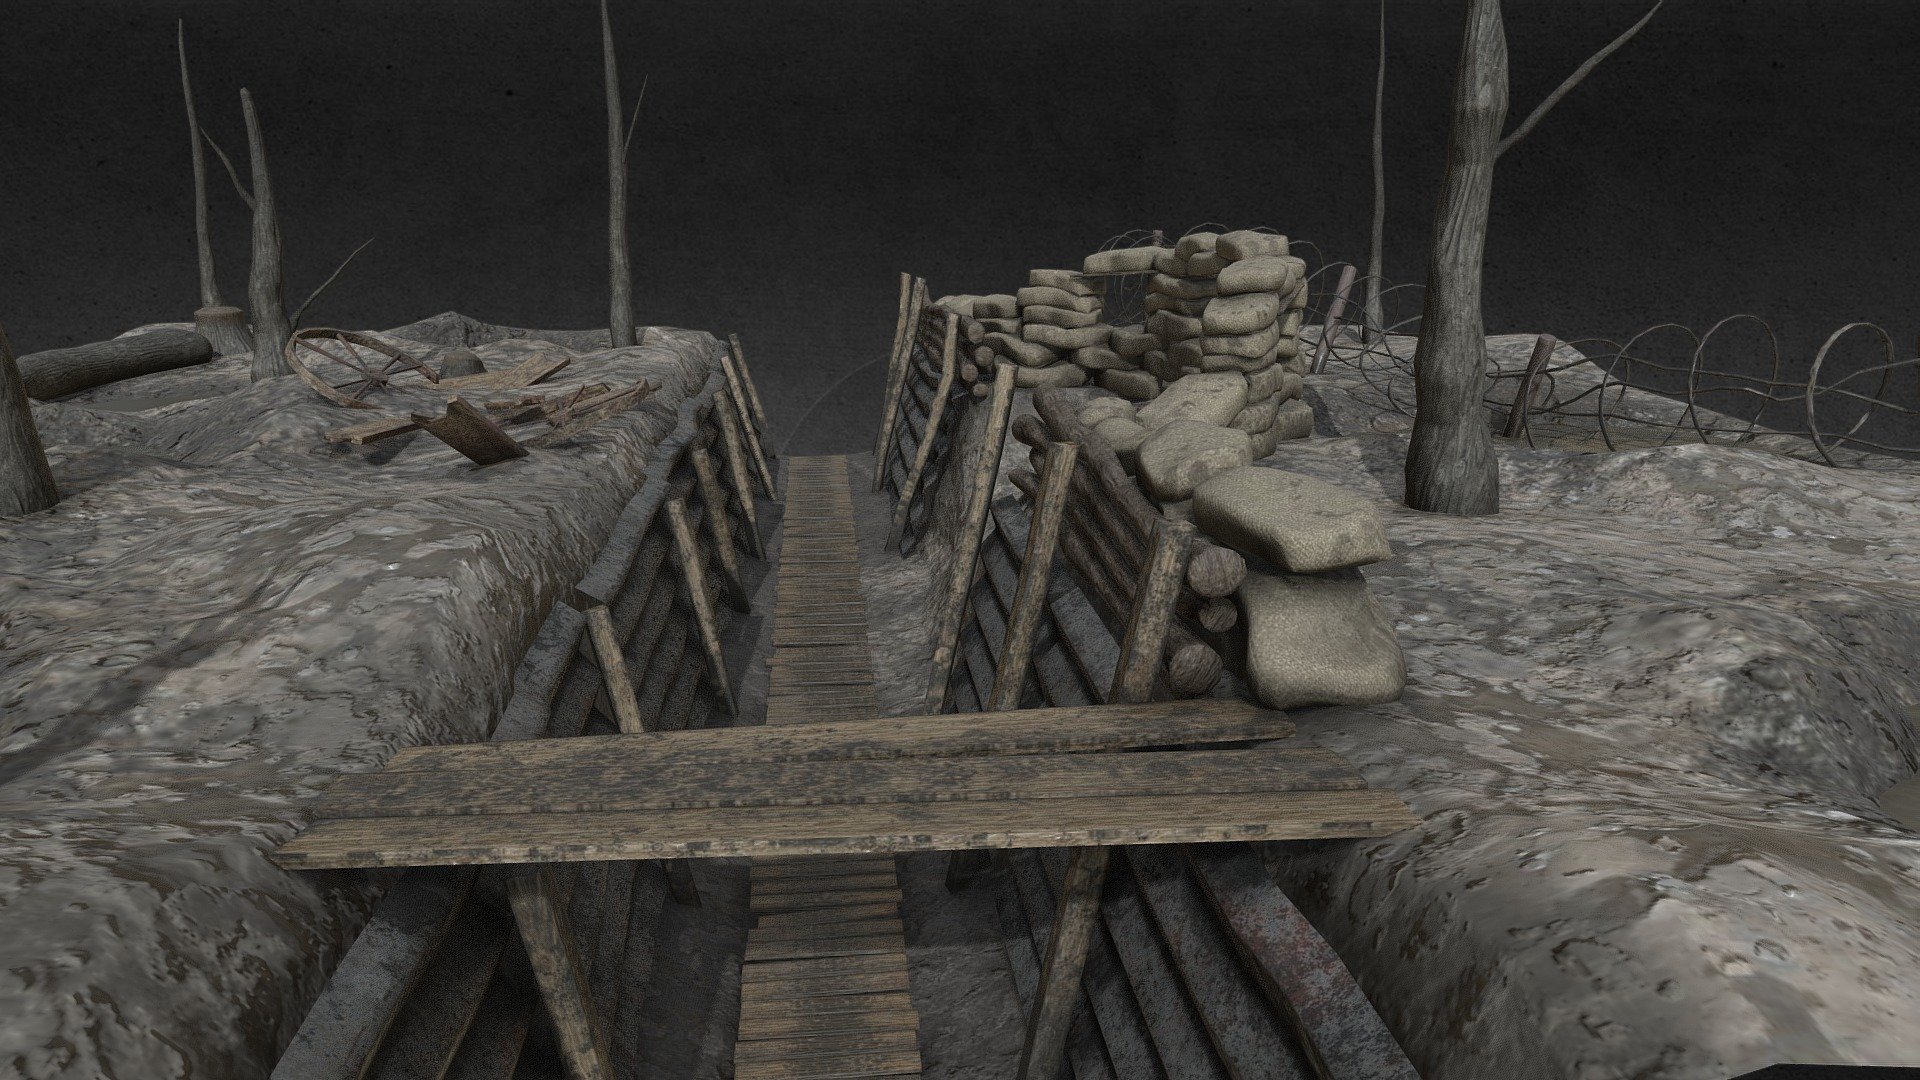 This is my World War 1 trench scene I have been working on and recently finished. My first attempt at a &ldquo;scene